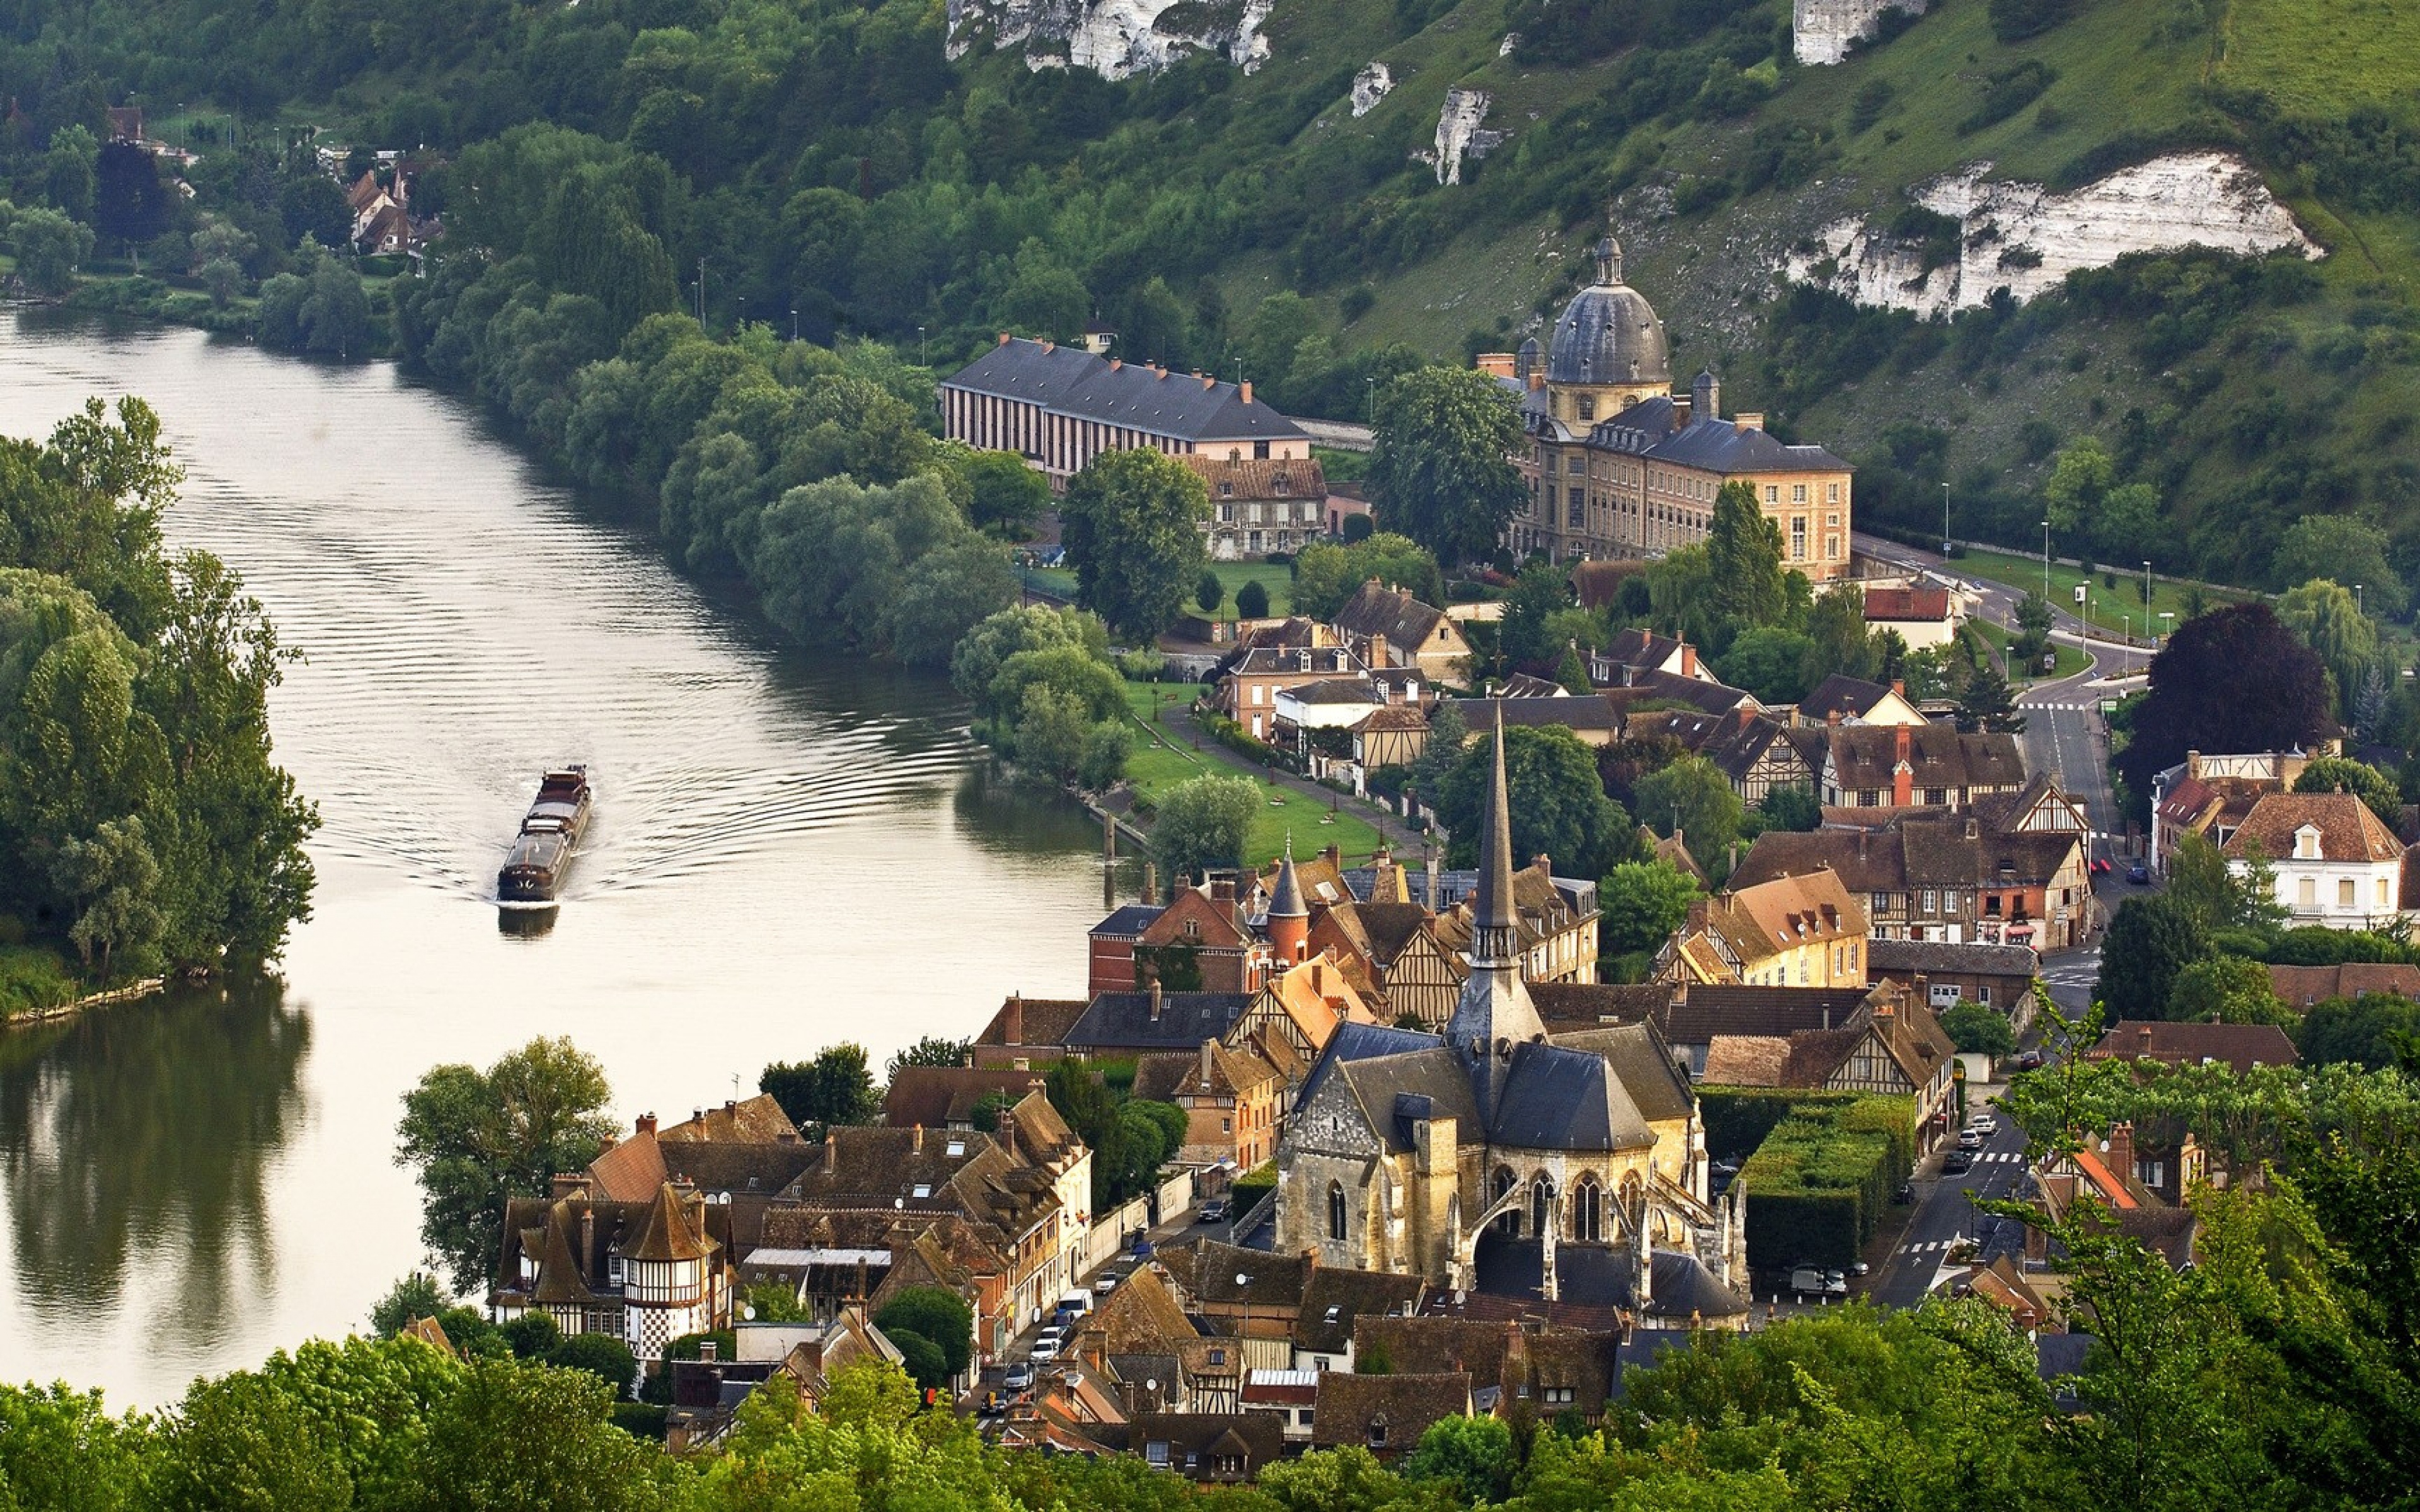 Download Wallpaper 3840x2400 Normandy France Valley Top view River